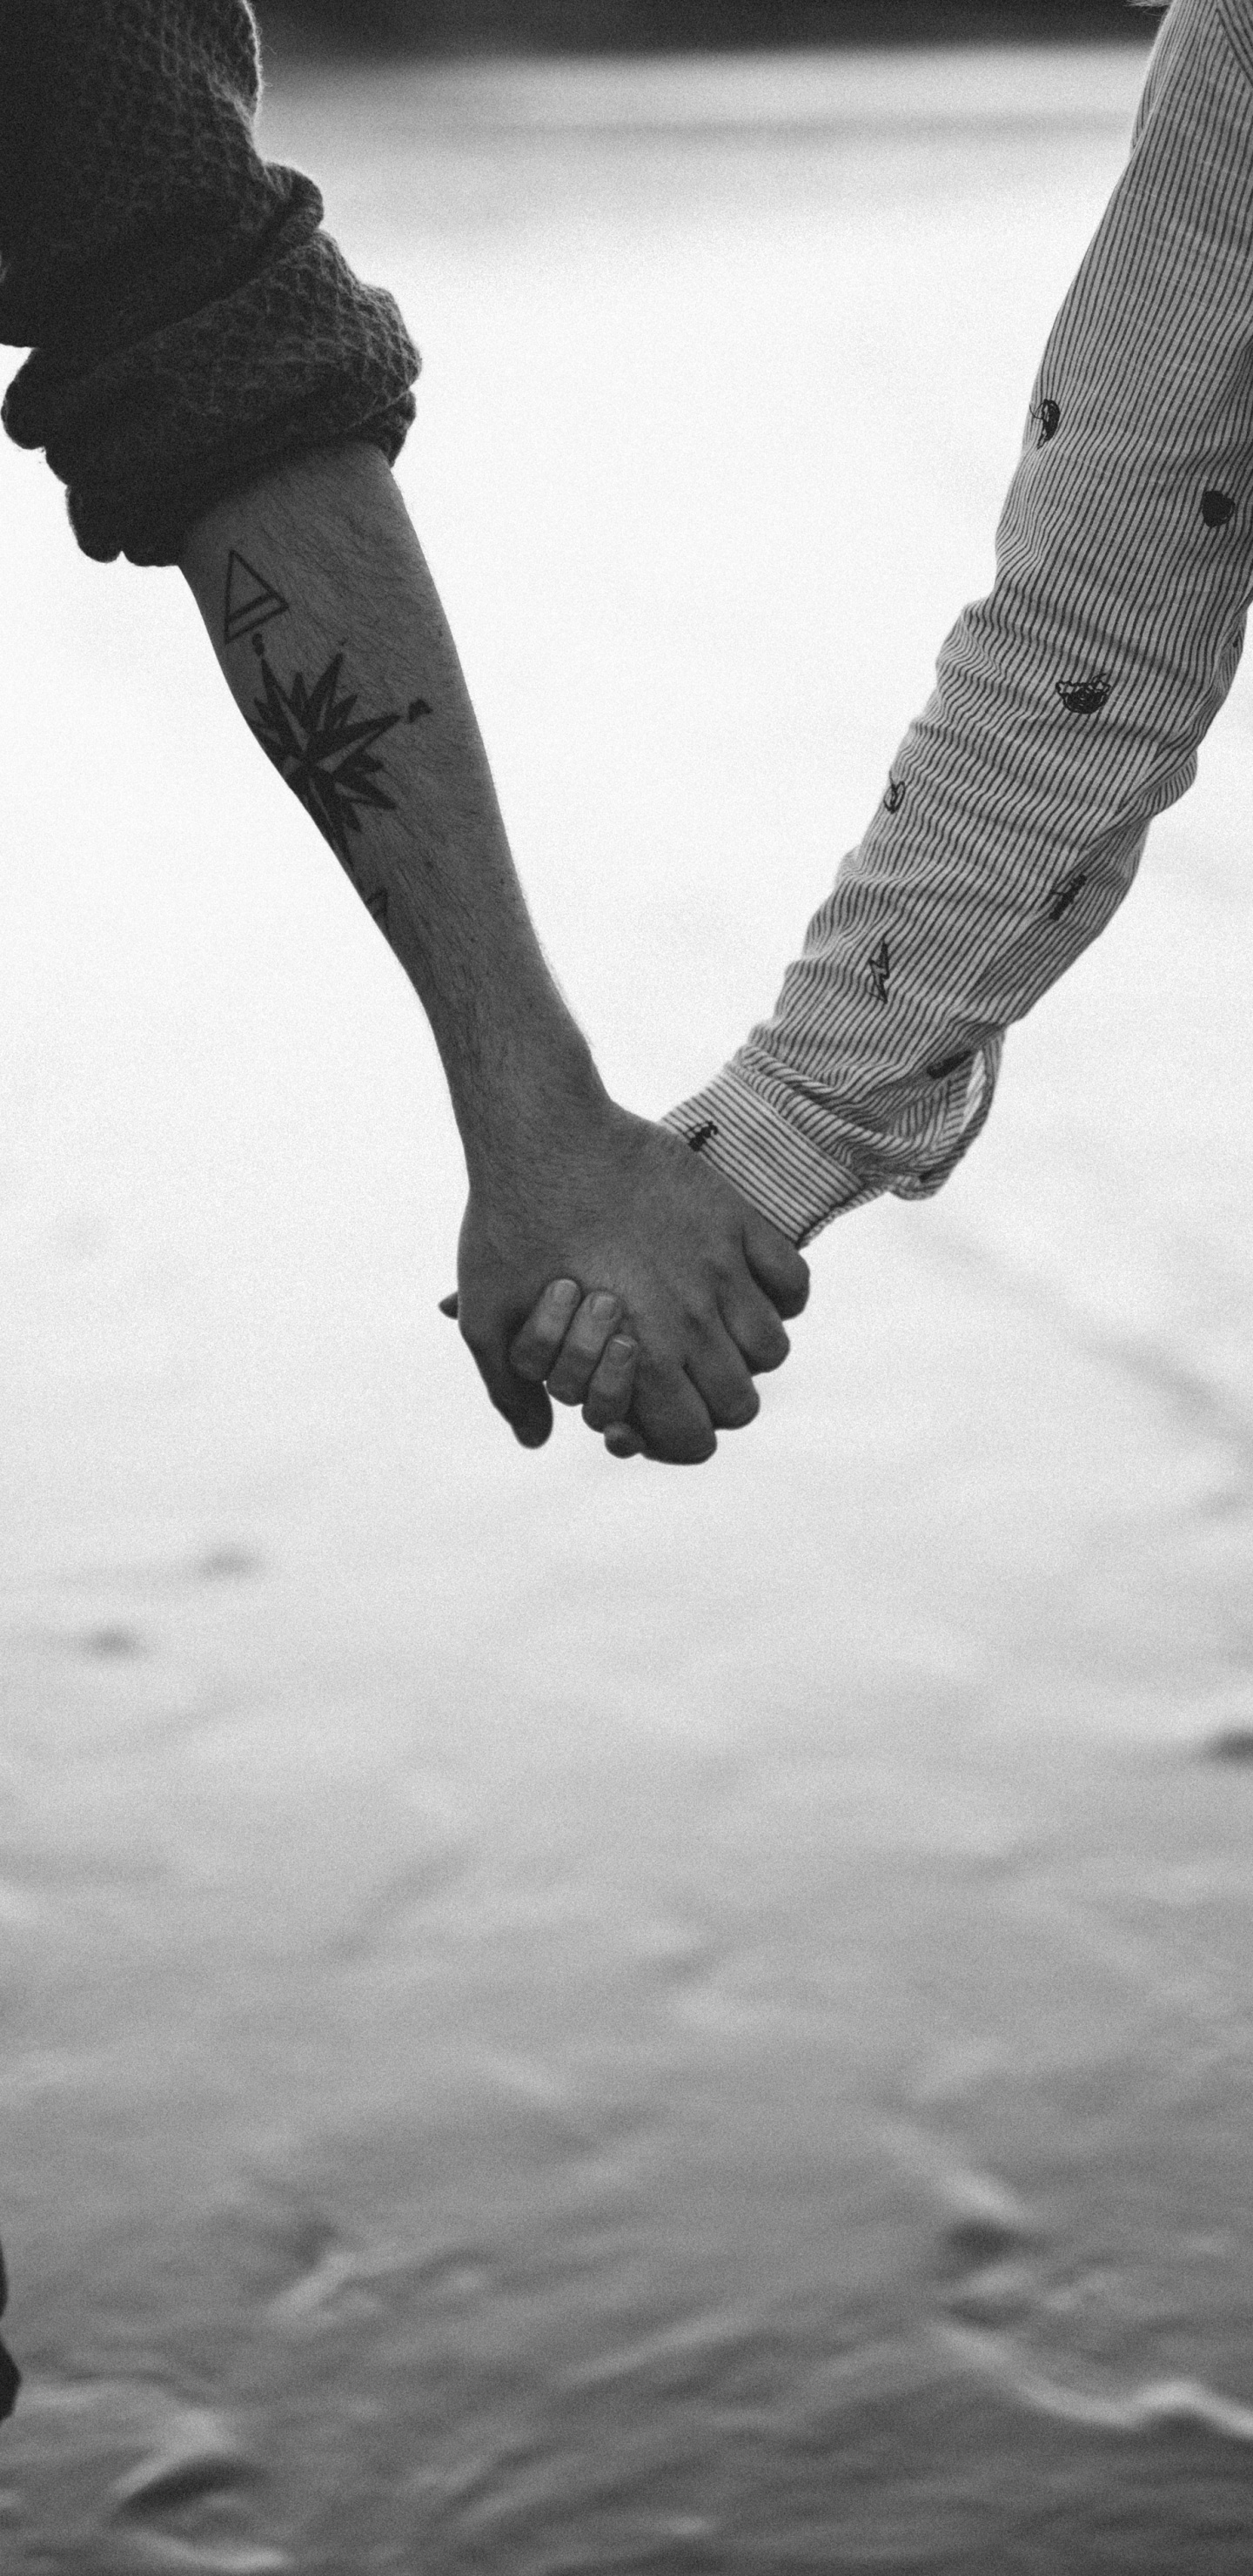 Couple, Holding Hands, White, People, Black. Wallpaper in 1440x2960 Resolution